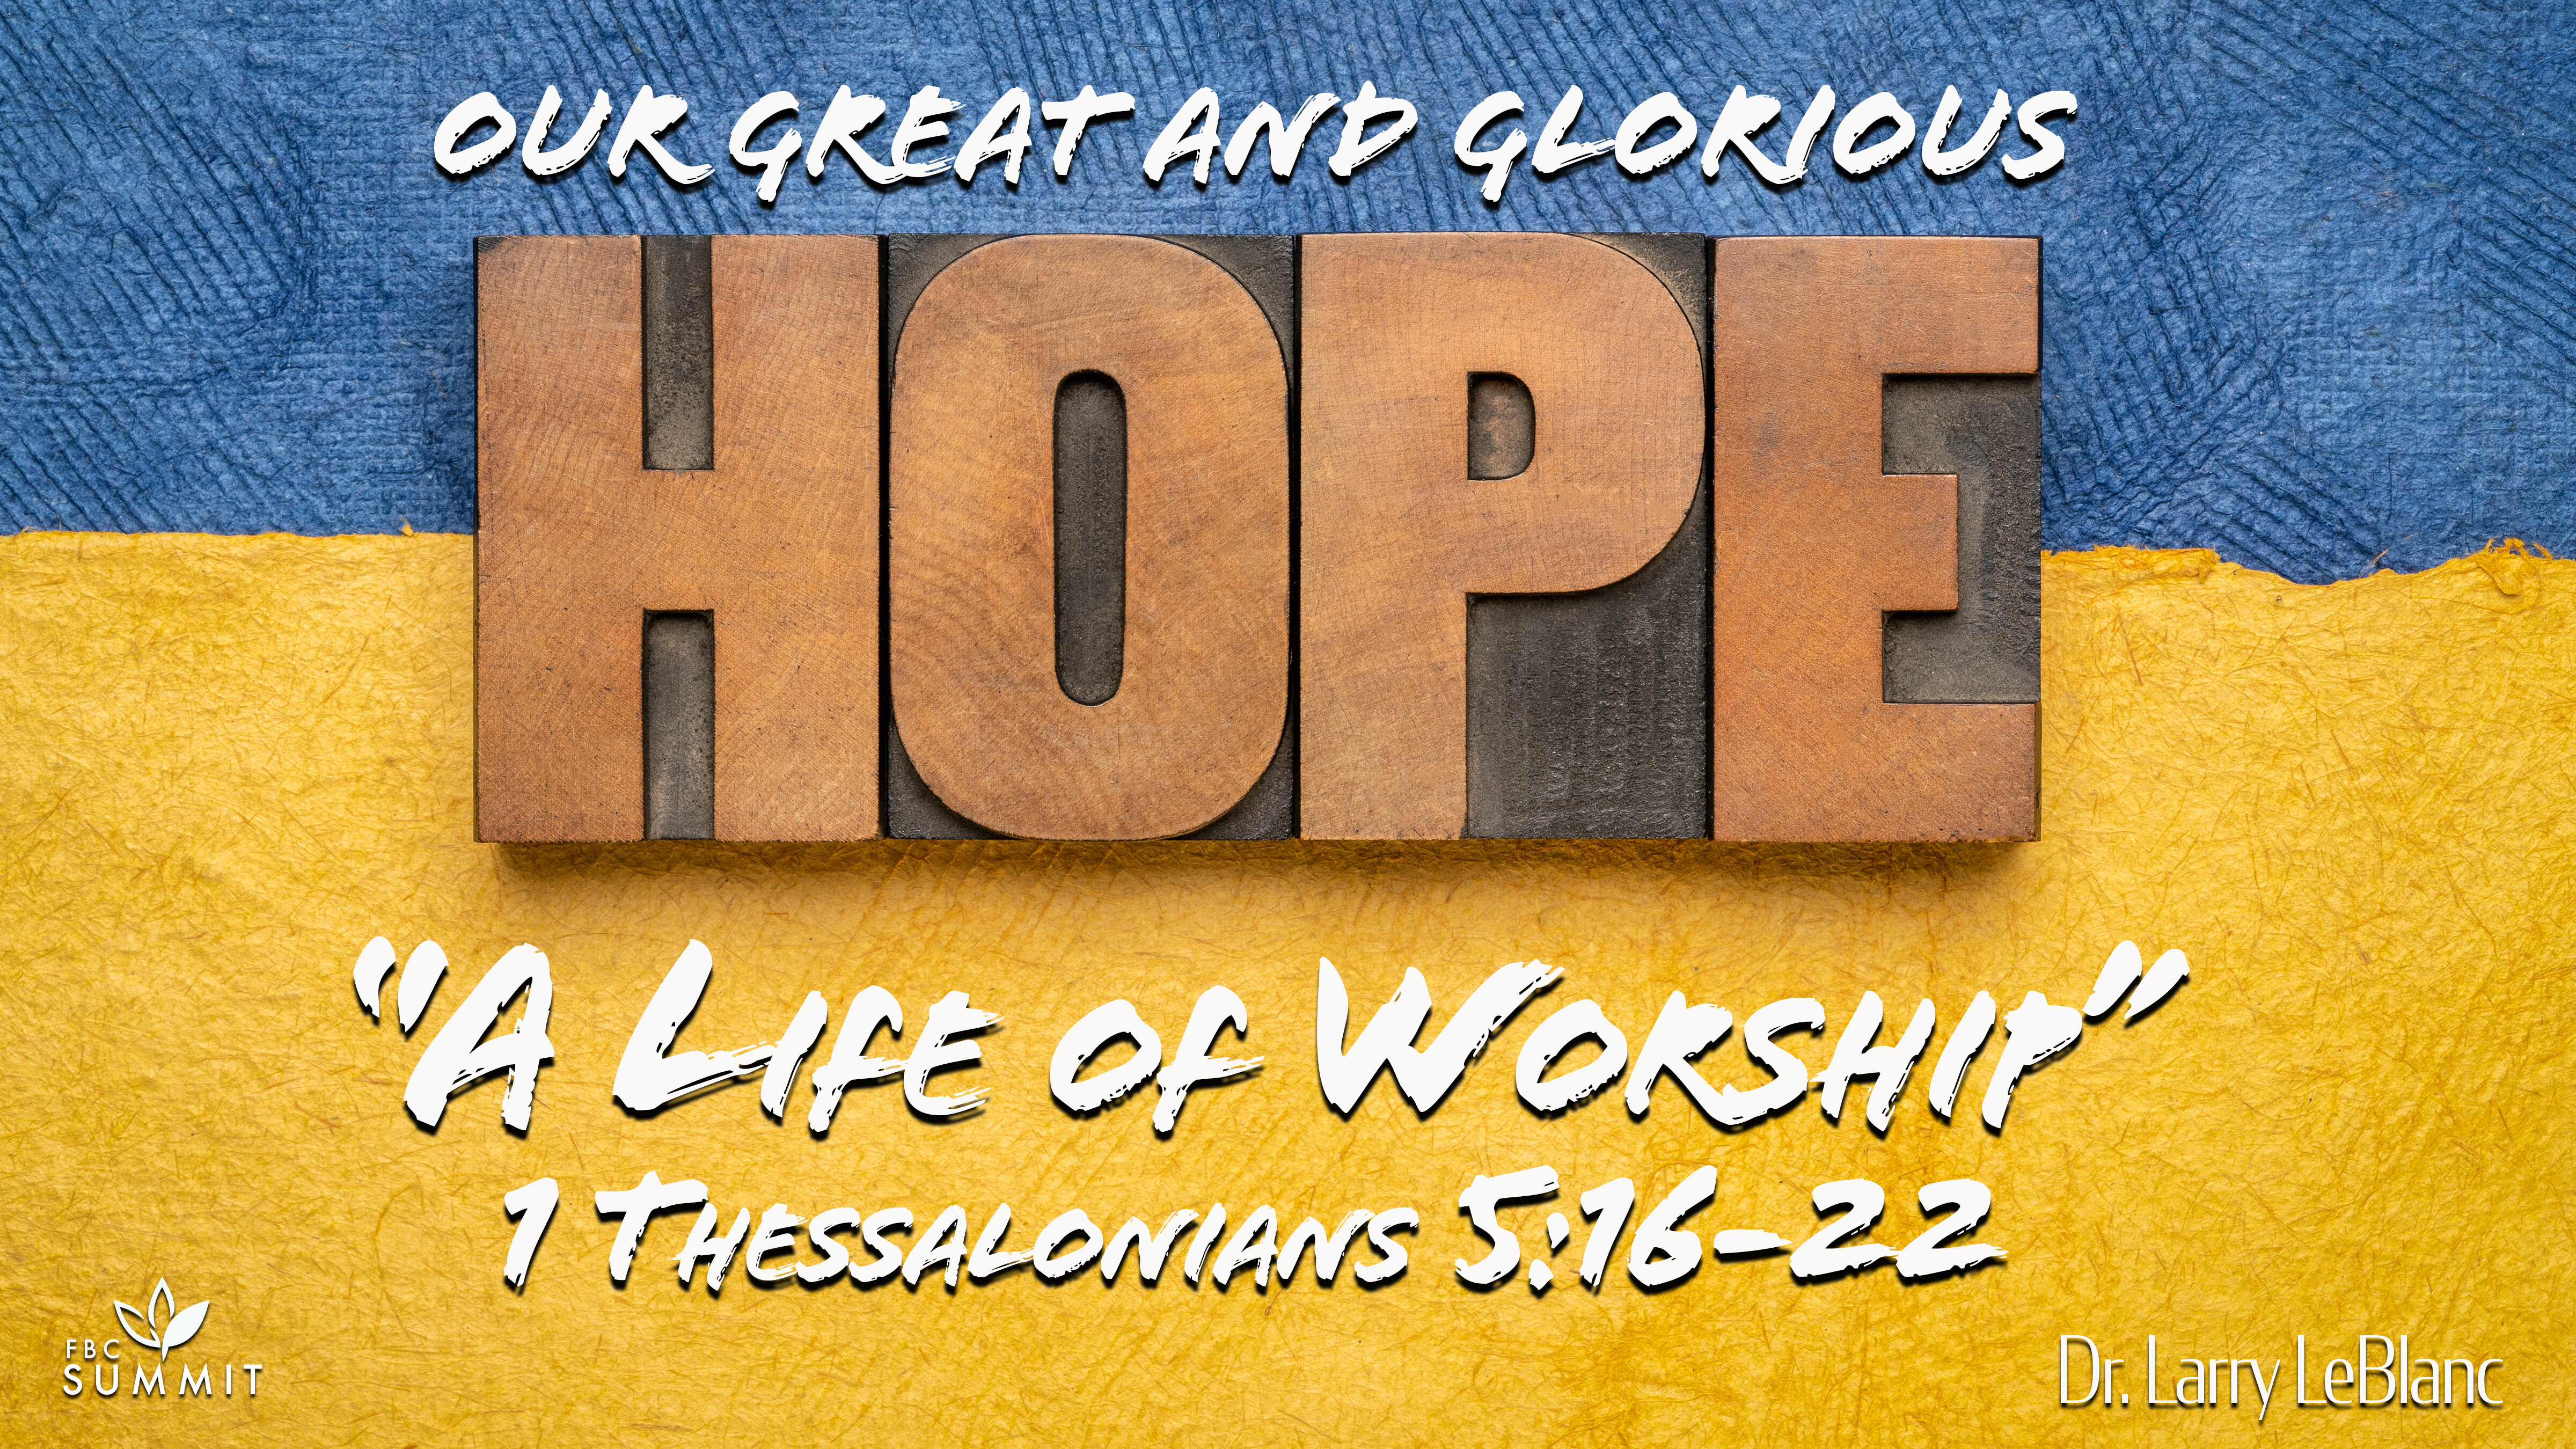 "A Life of Worship" 1 Thessalonians 5:16-22 // Dr. Larry LeBlanc